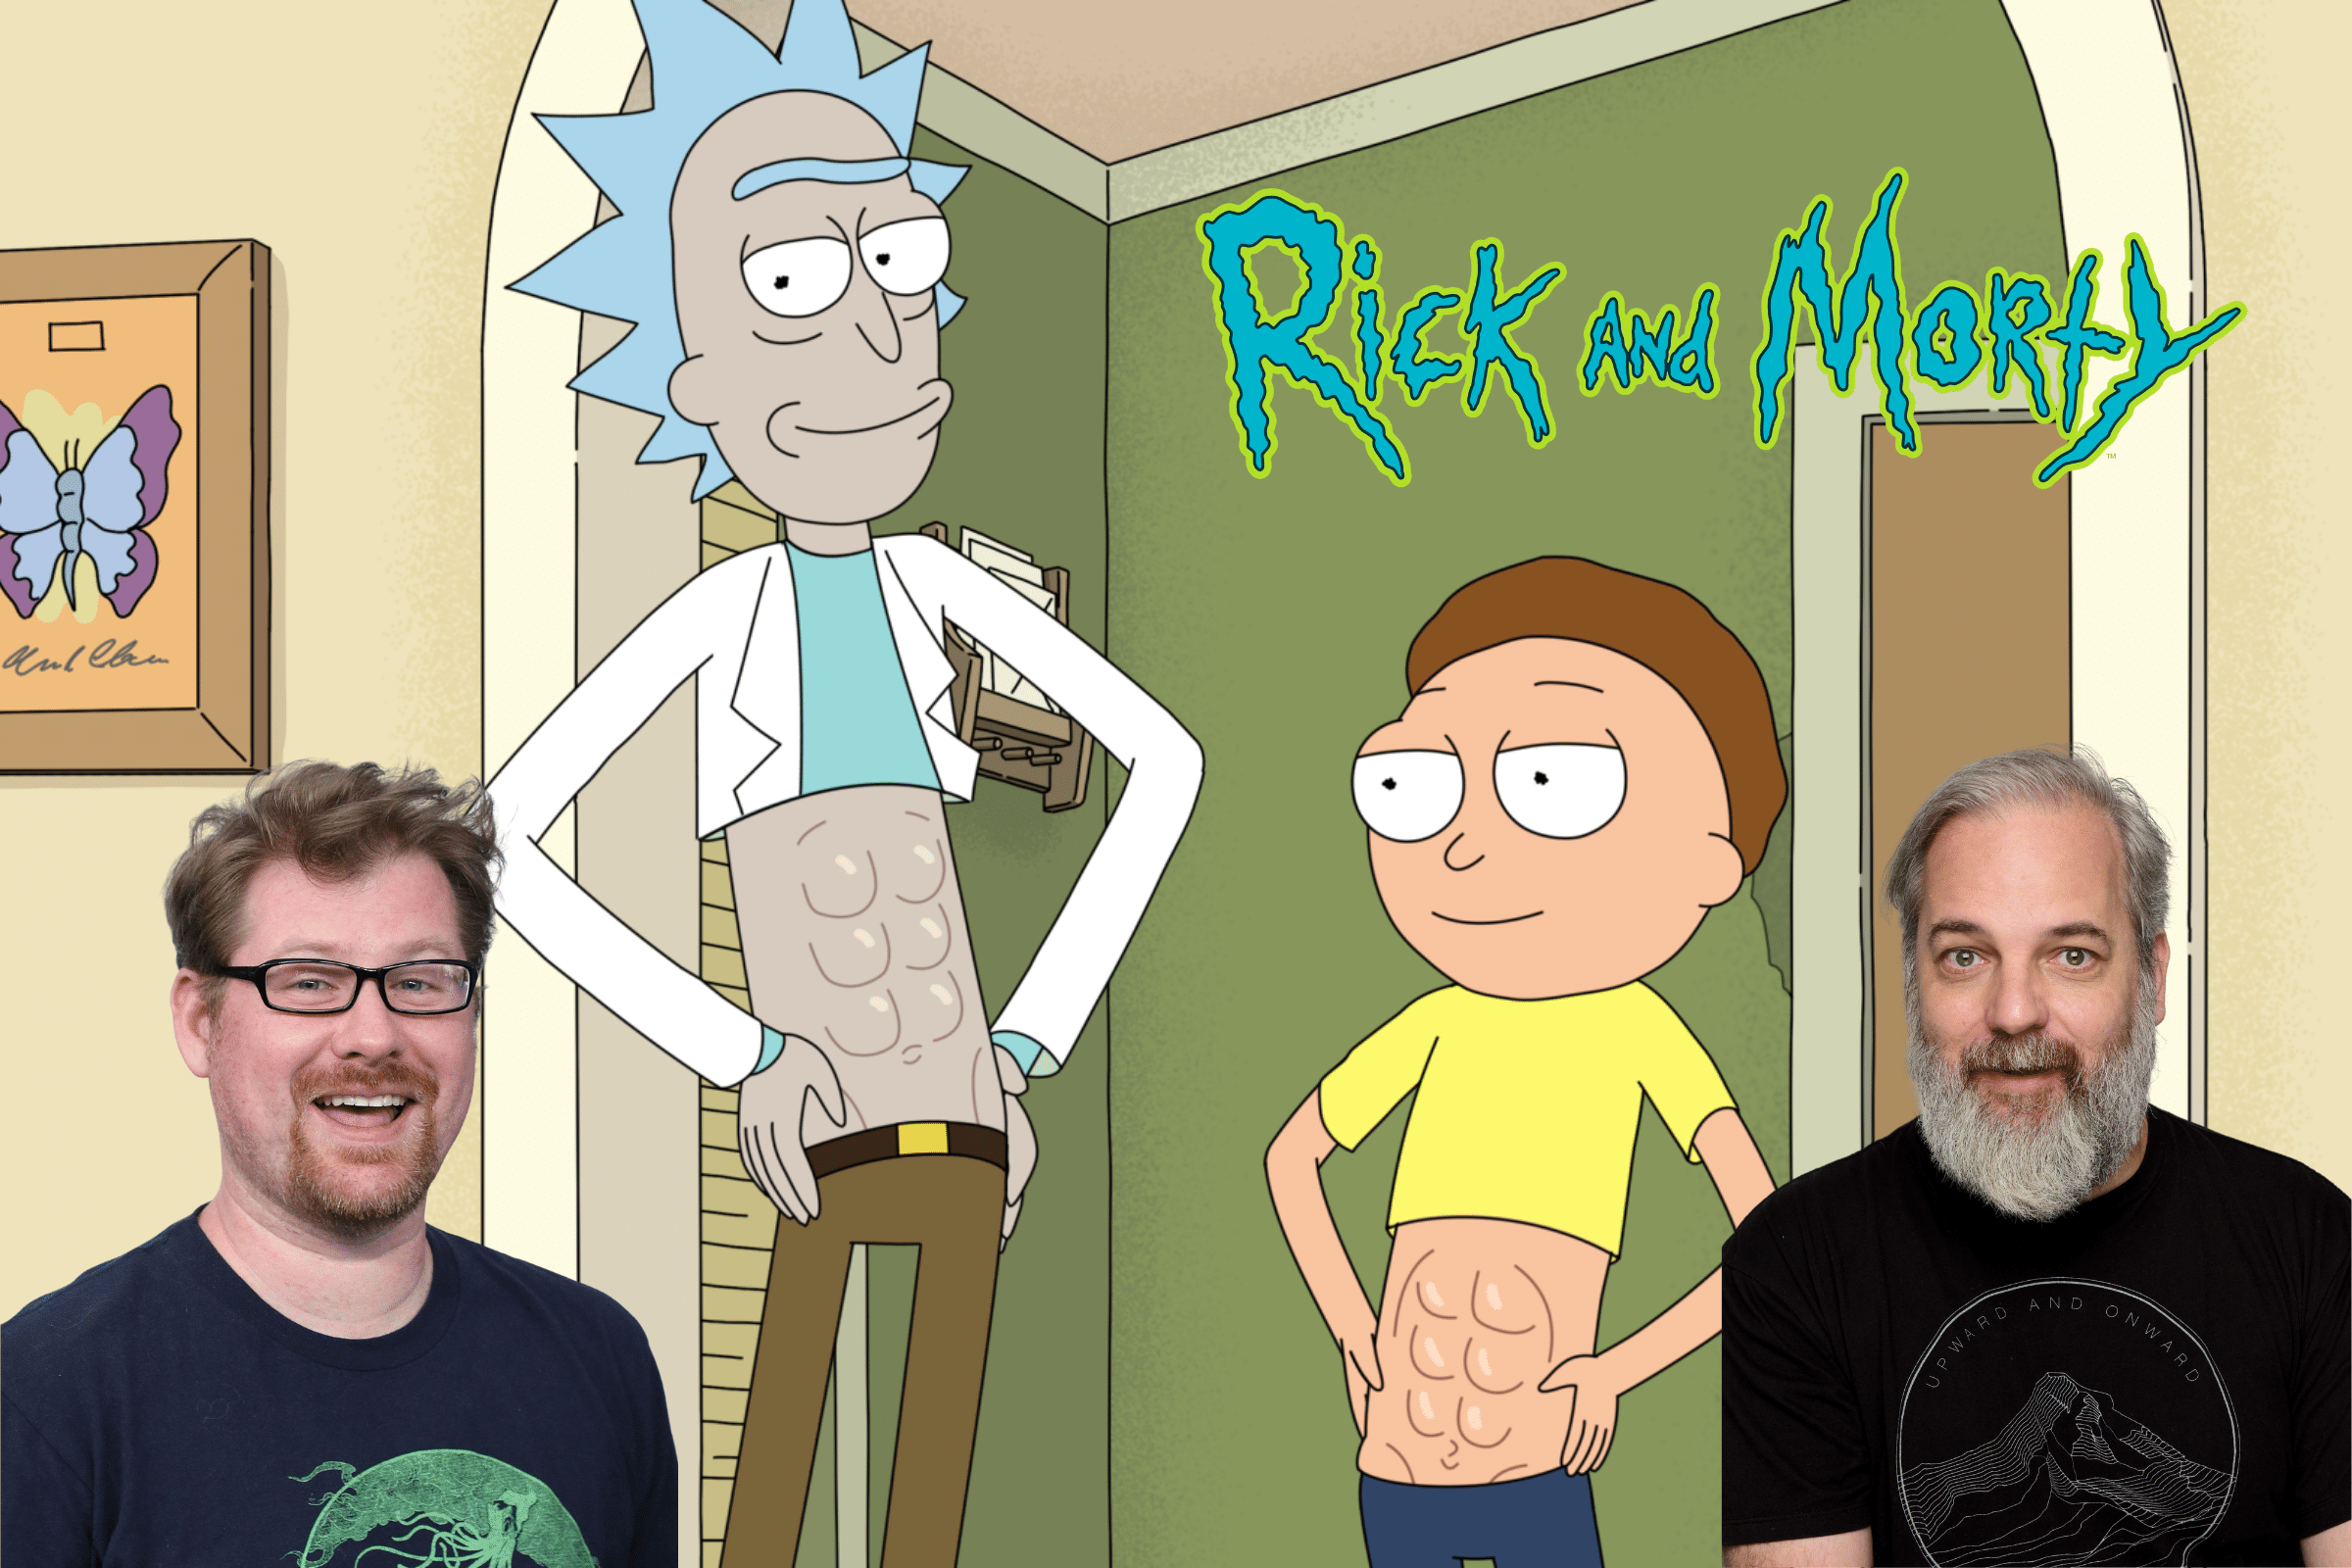 The Great Shame of Being a Man Who Loves Rick and Morty